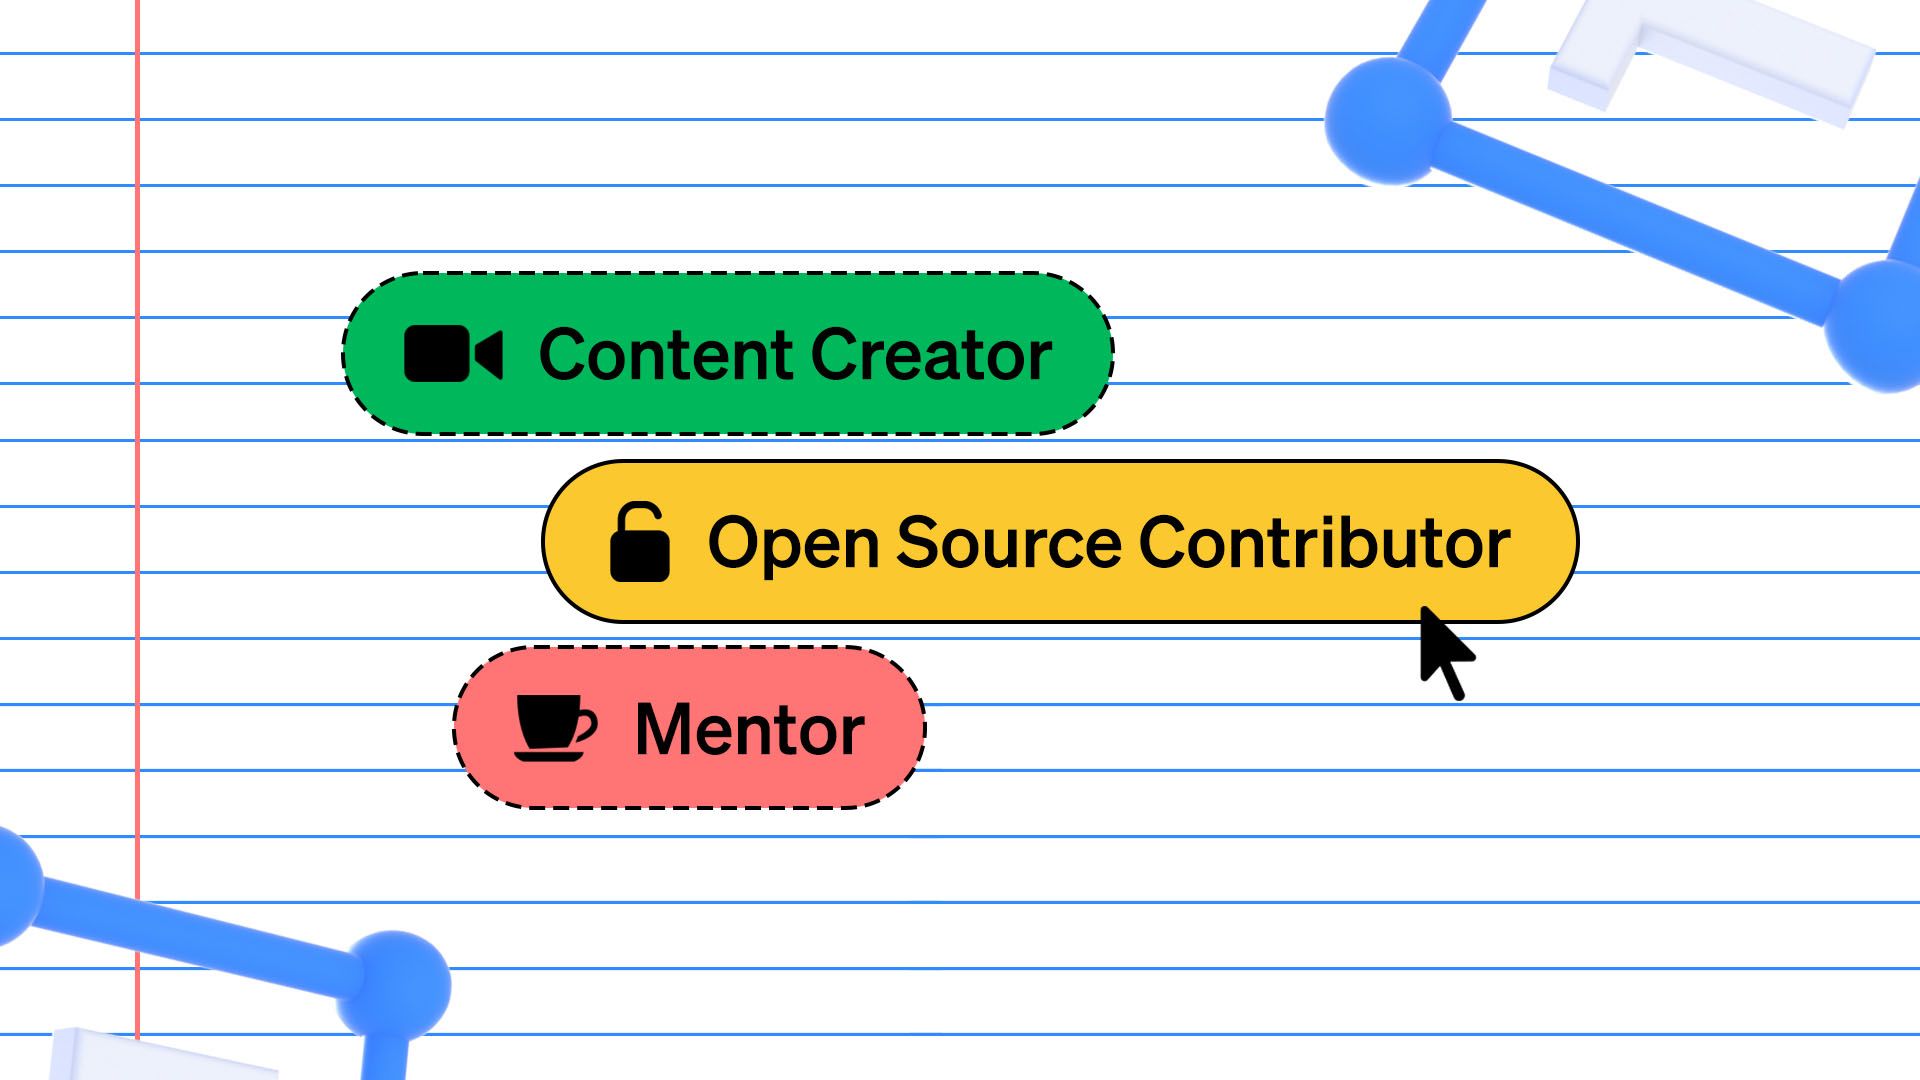 My Polywork Story as a Content Creator, Mentor, and Open Source Contributor